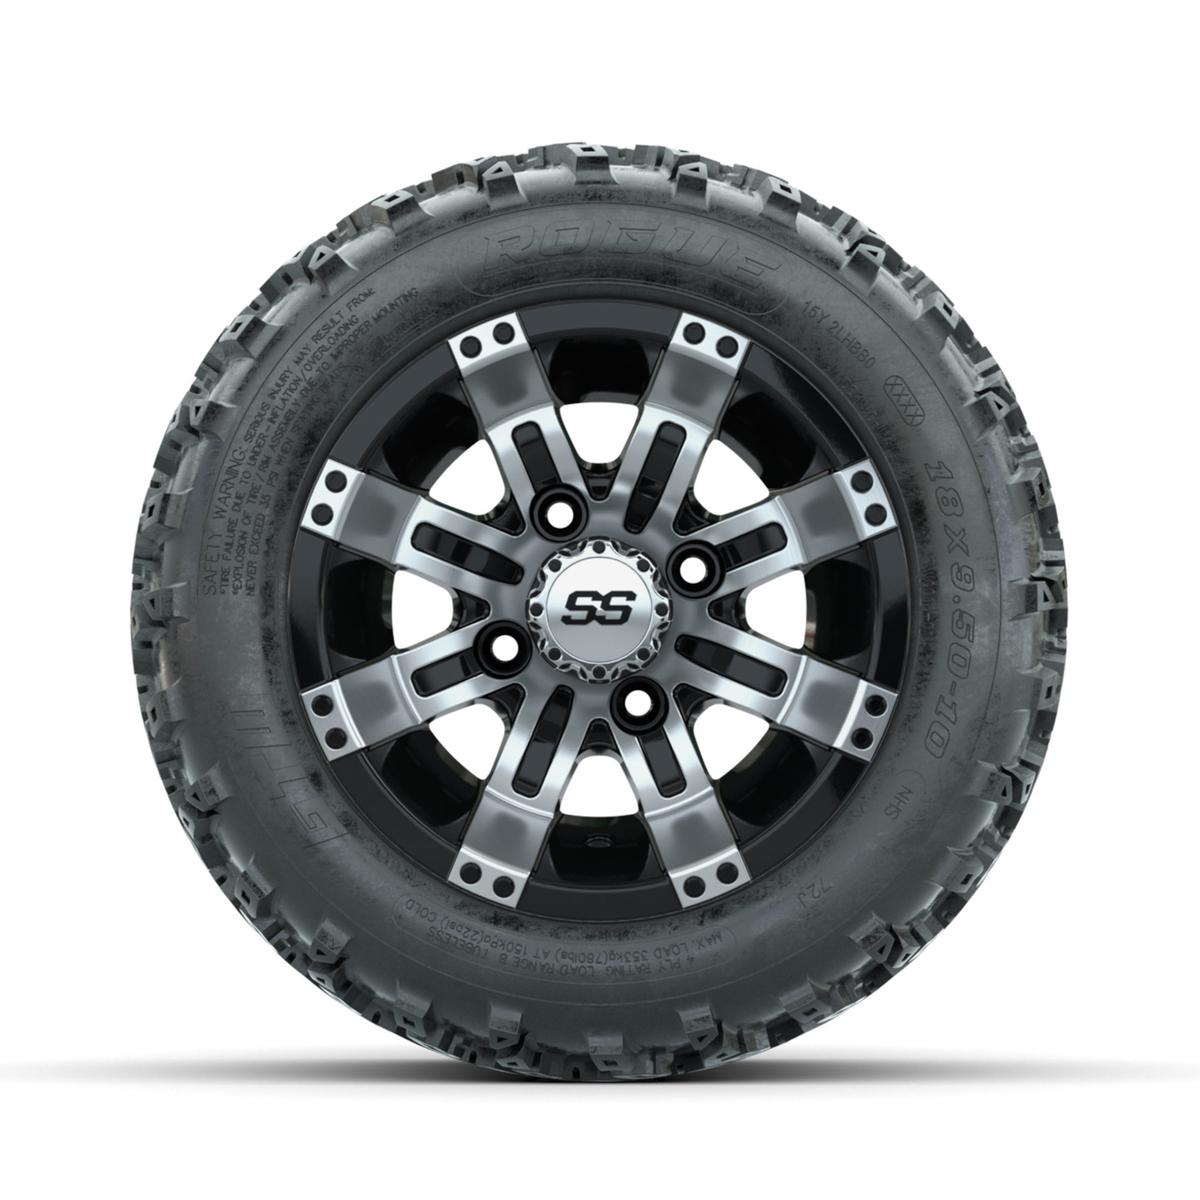 GTW Tempest Machined/Black 10 in Wheels with 18x9.50-10 Rogue All Terrain Tires – Full Set